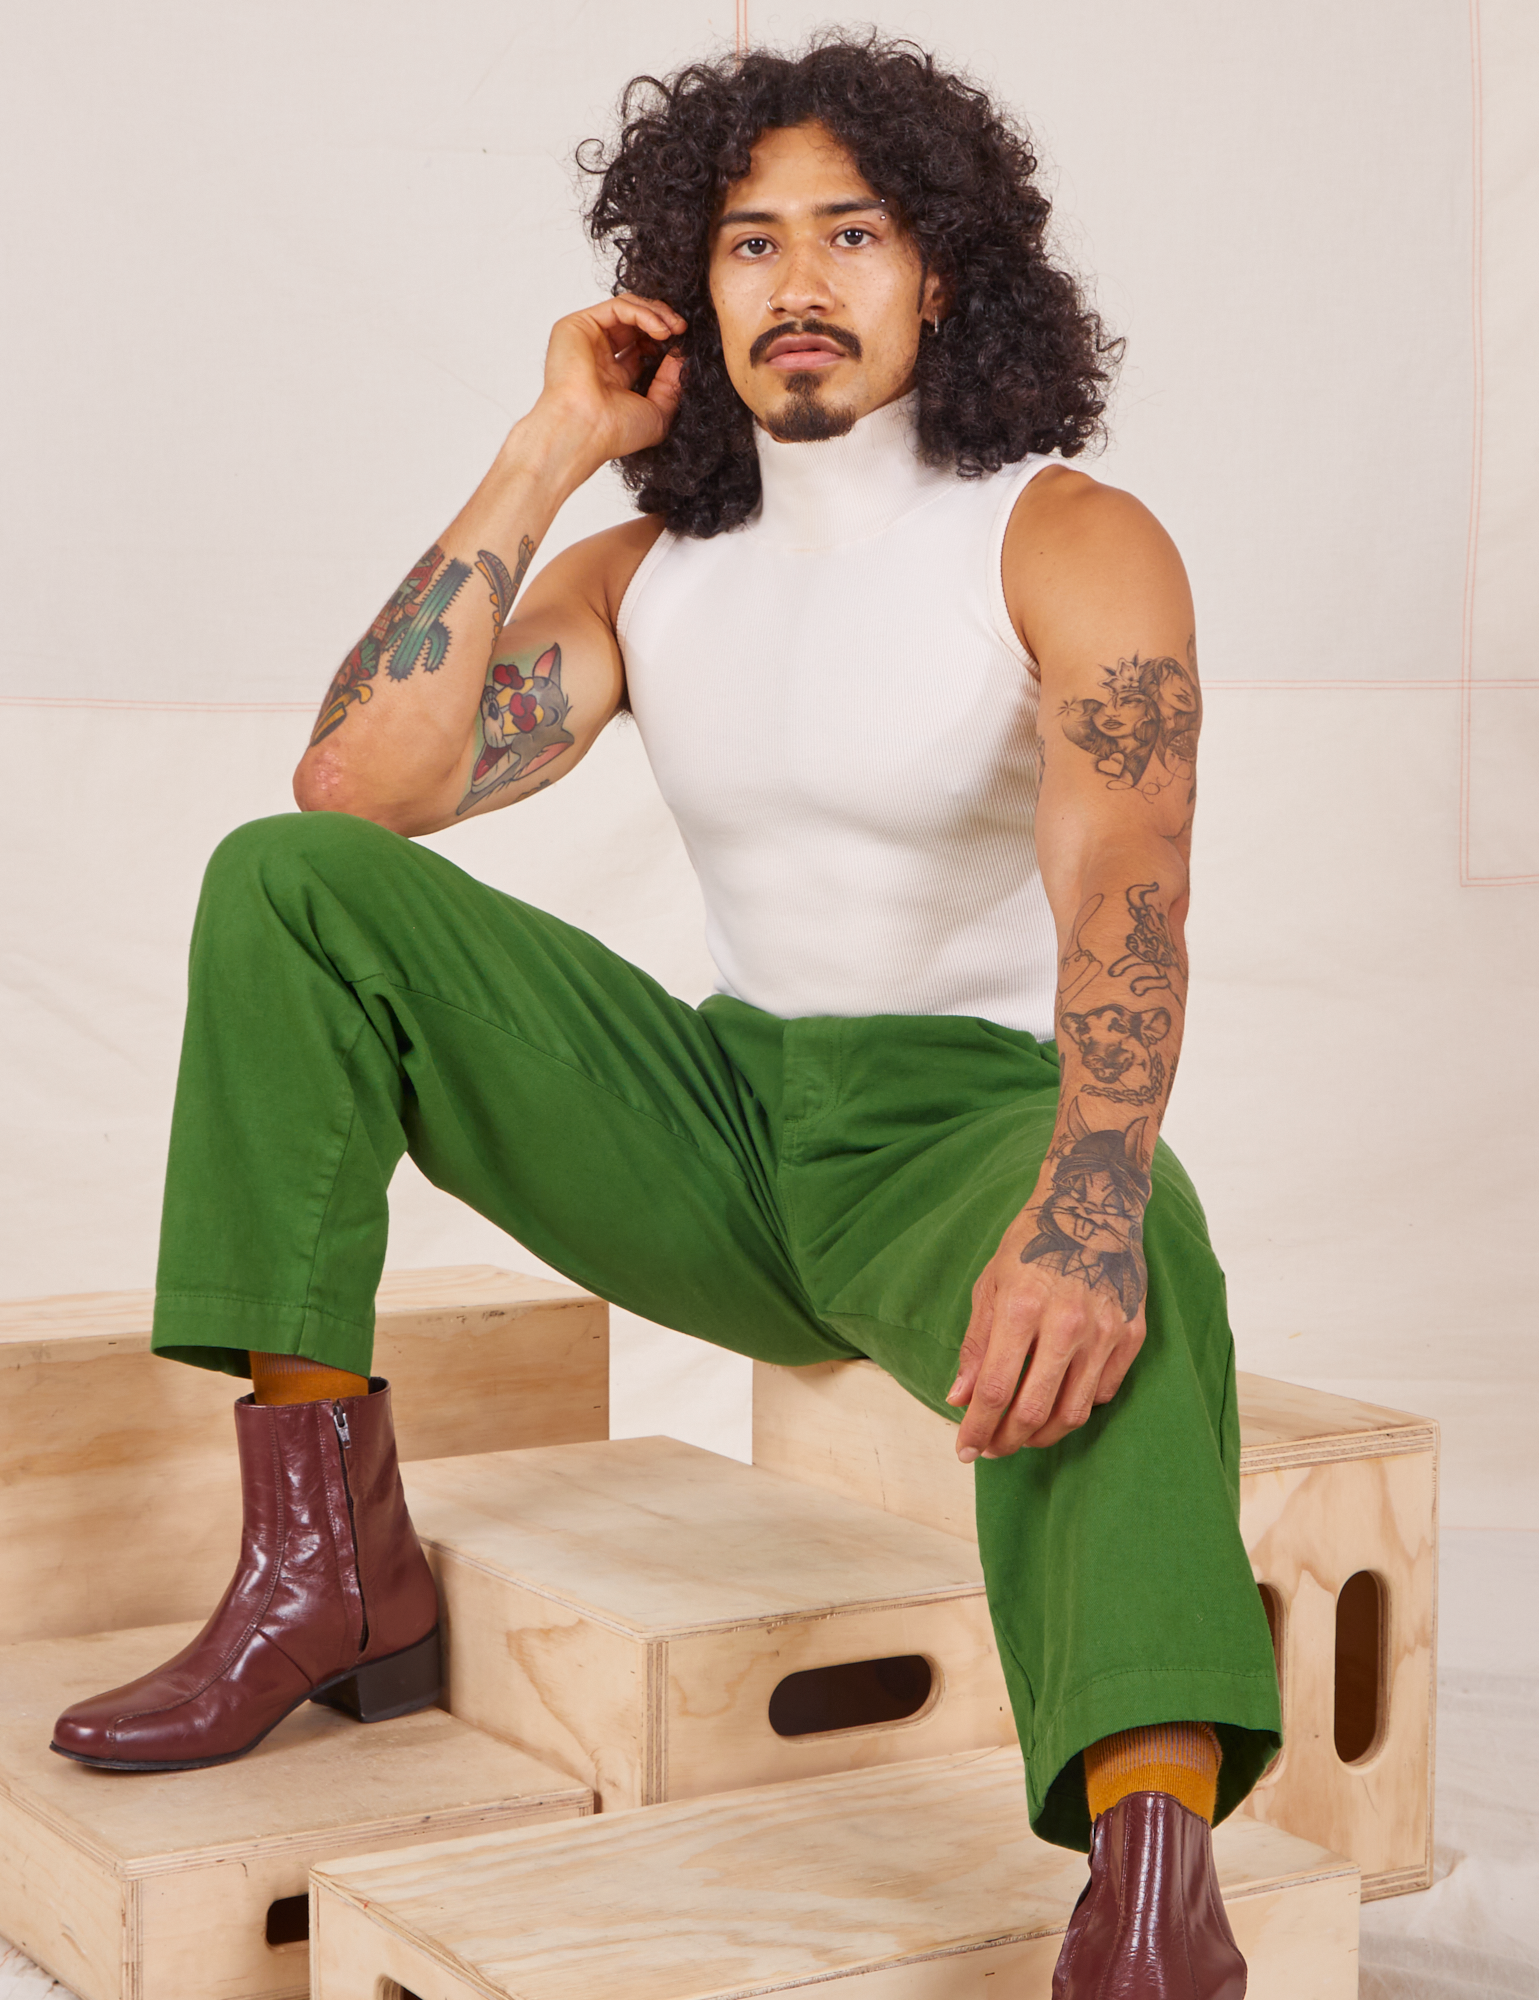 Jesse is sitting on a wooden crate wearing Heavyweight Trousers in Lawn Green and Sleeveless Turtleneck in vintage tee off-white